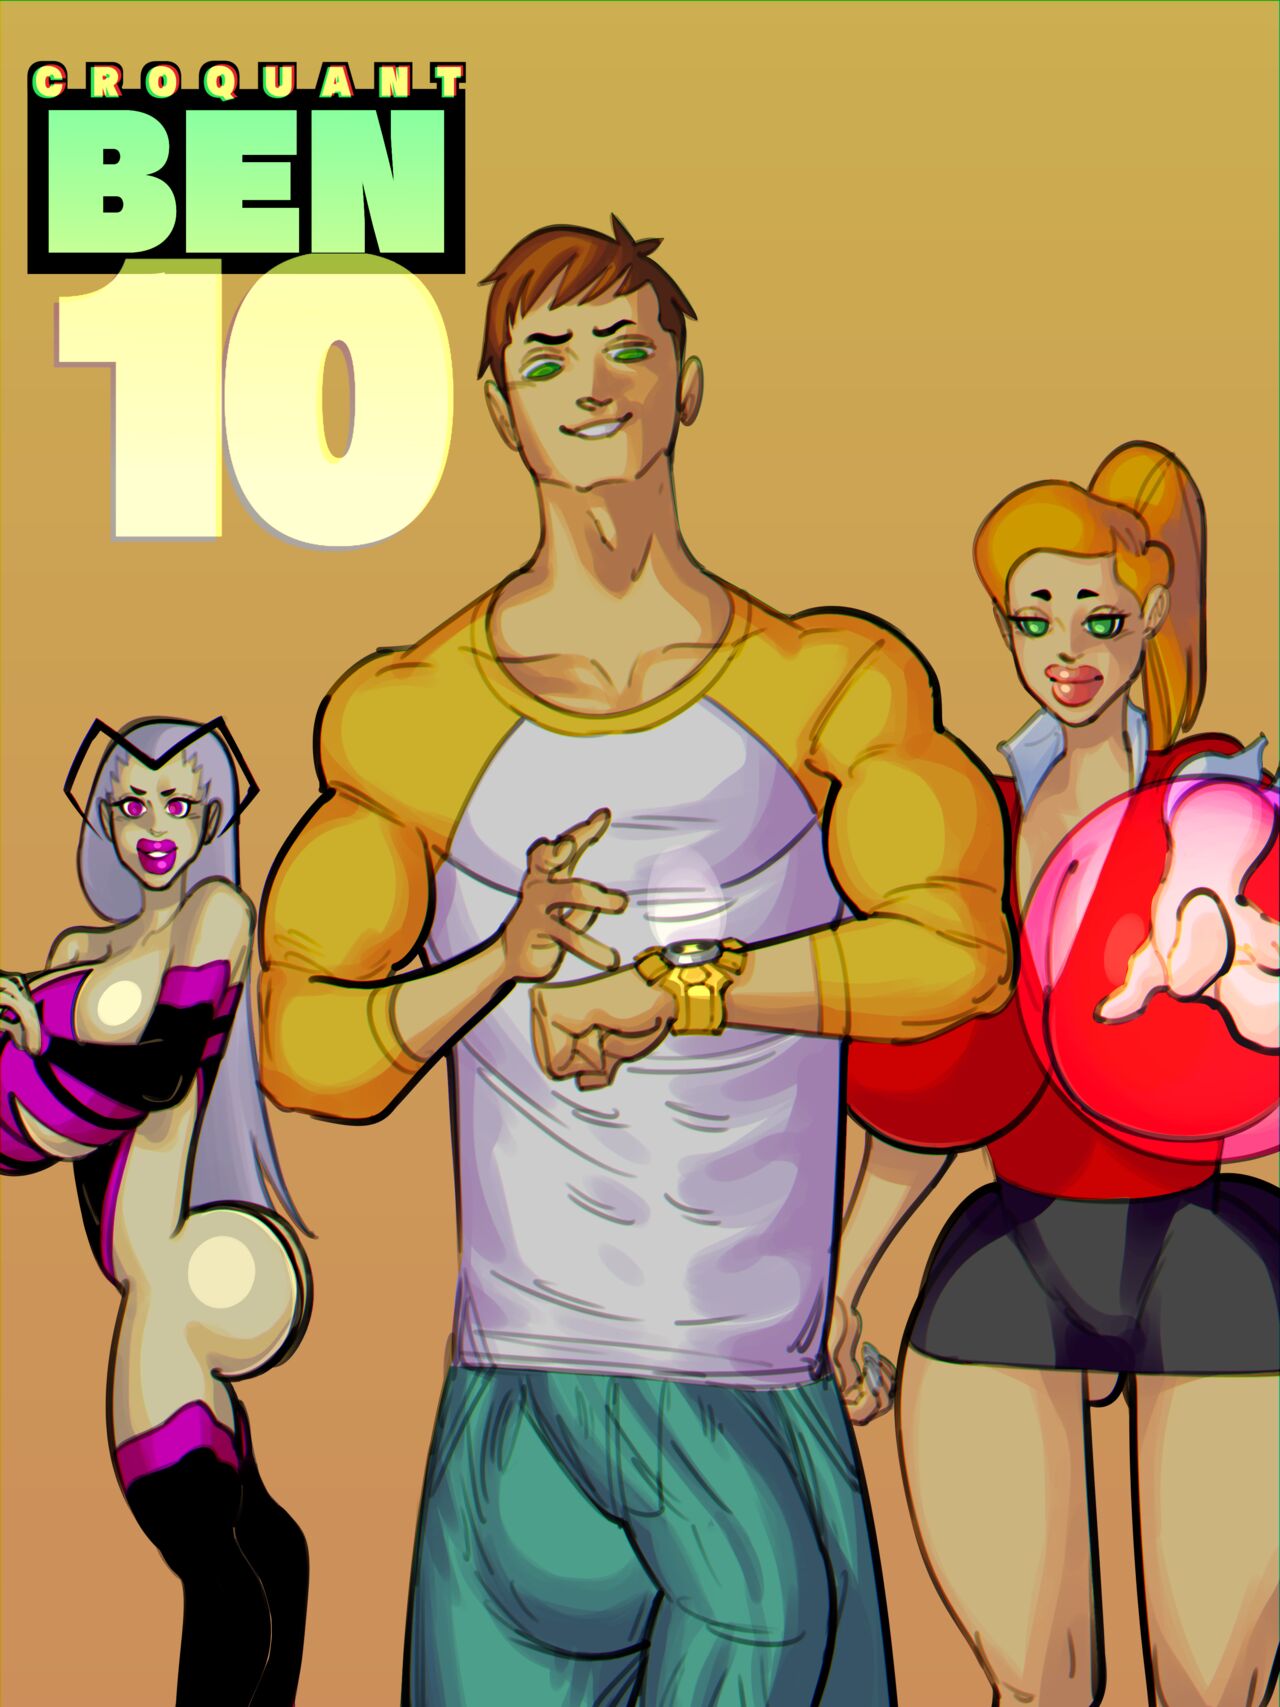 Shemale Cartoon Porn Ben 10 Four Arms - BEN Remake TEN By Croquant - FreeAdultComix